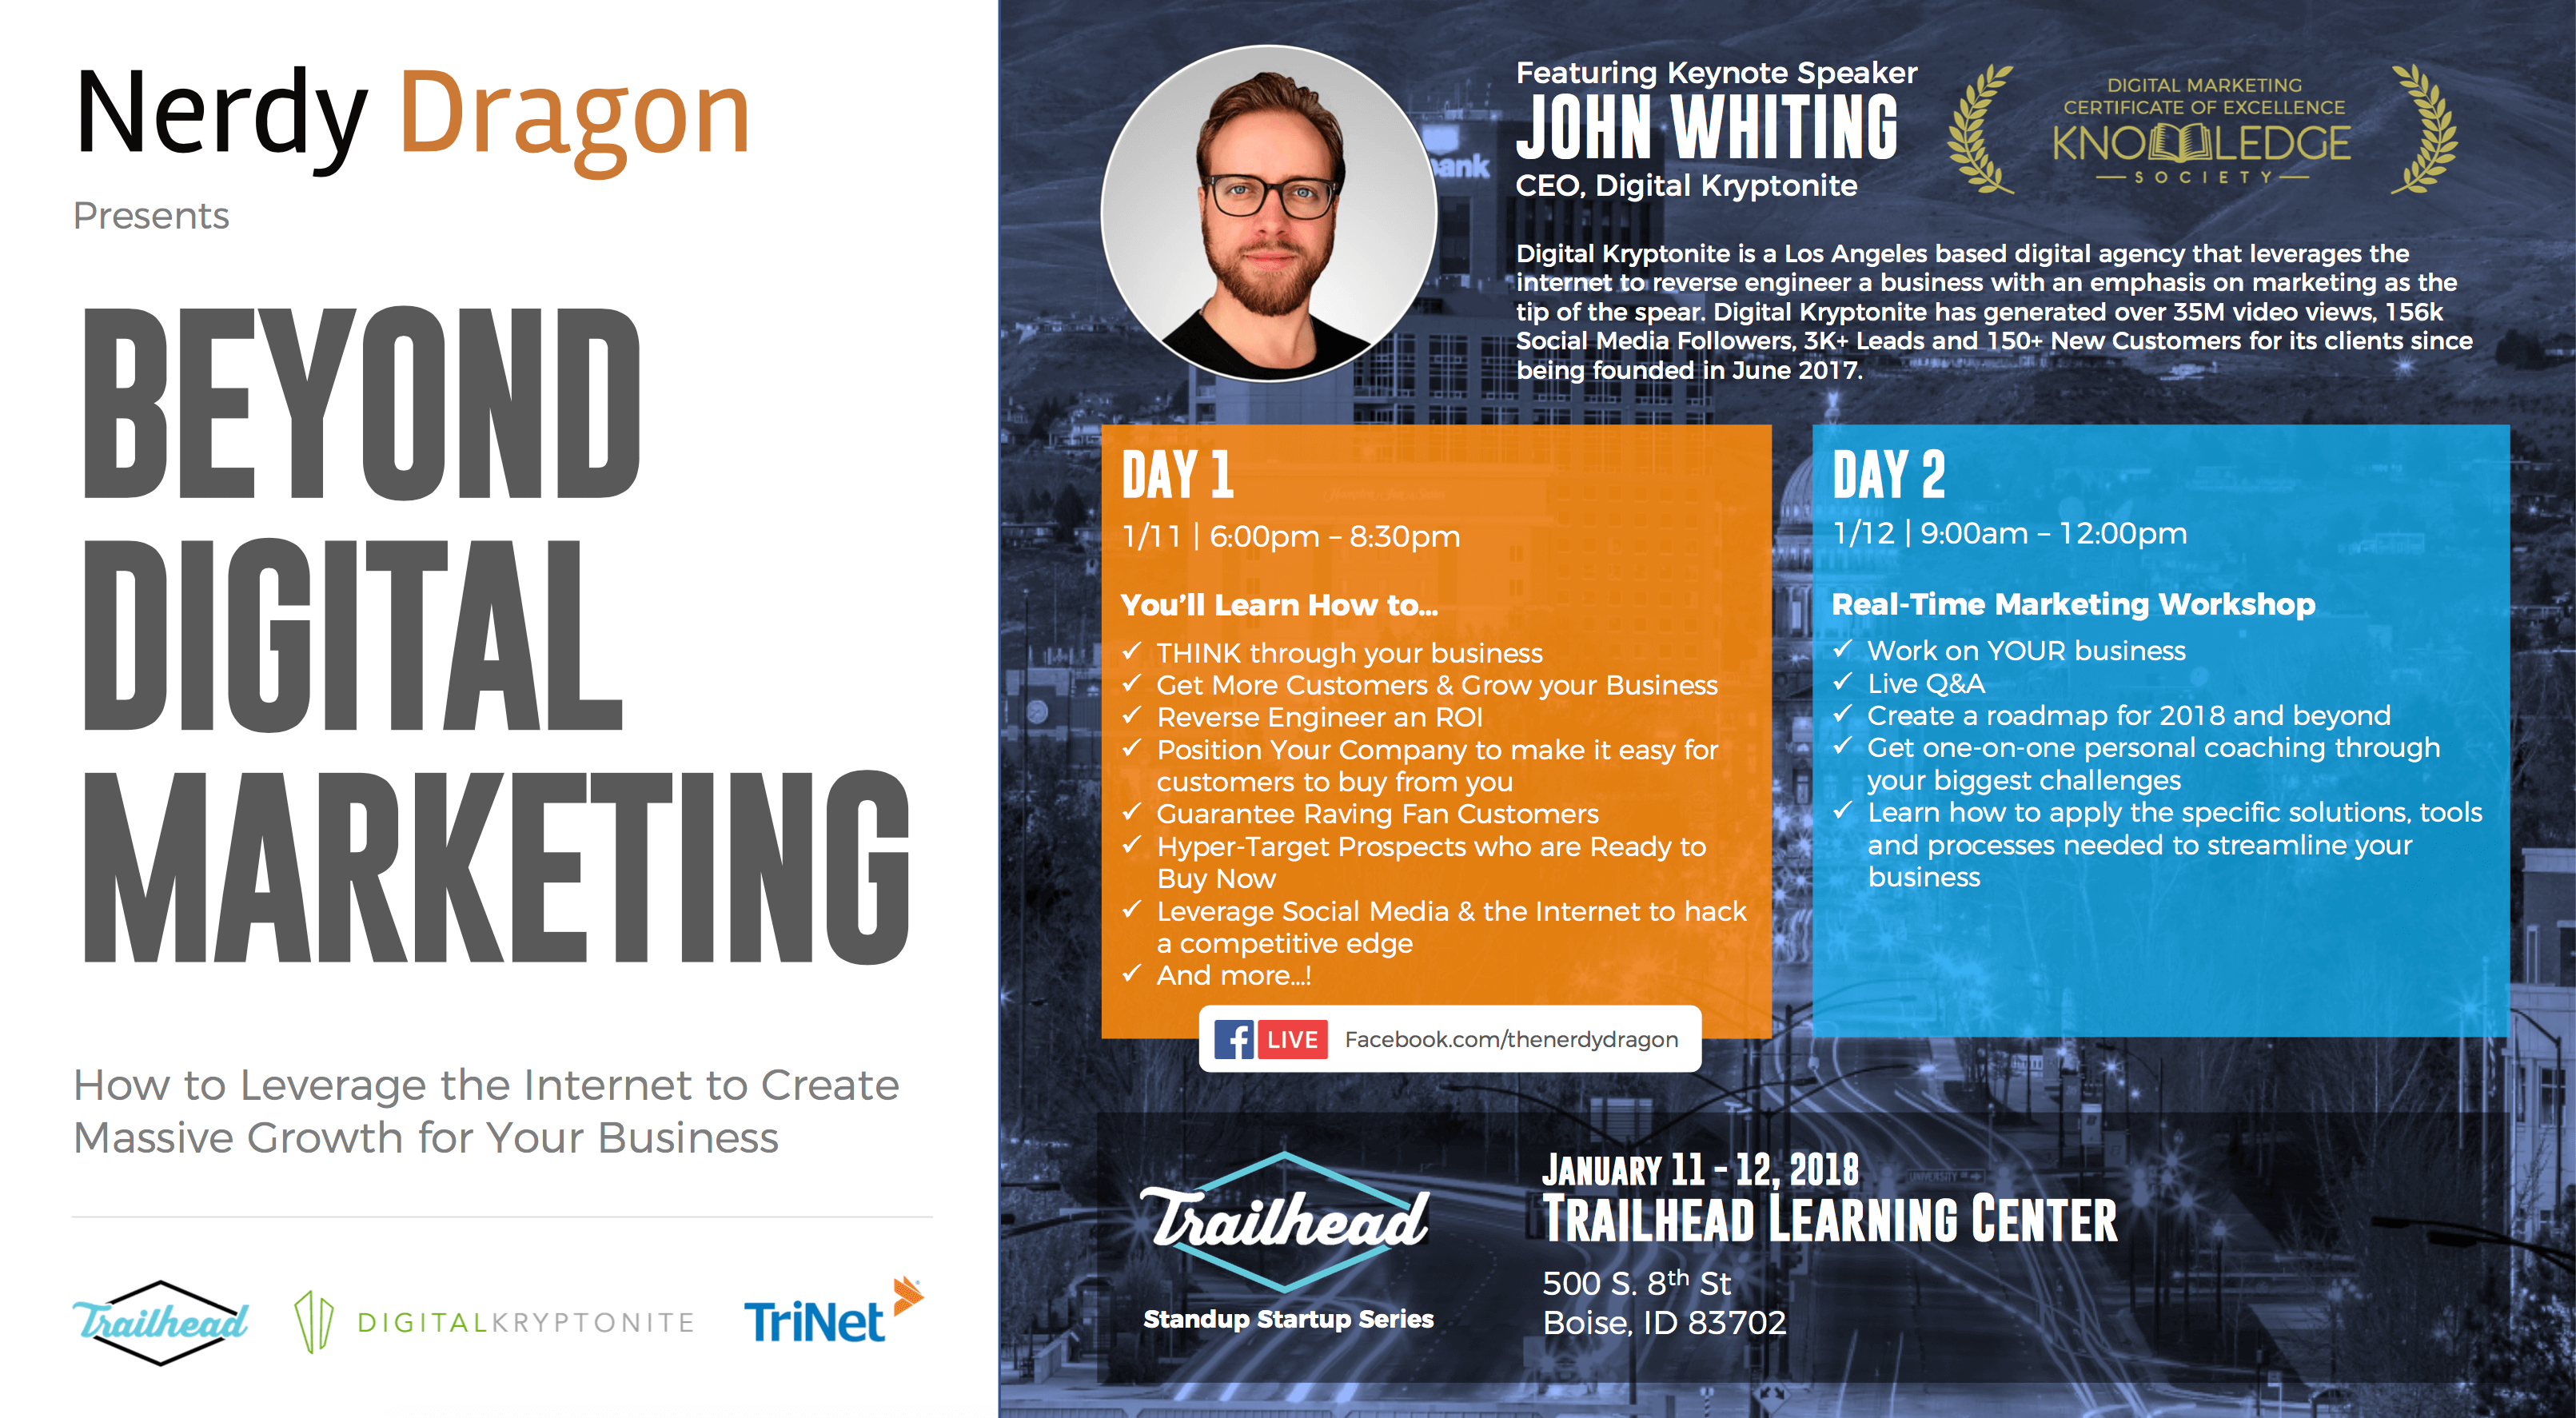 Beyond Digital Marketing - with John Whiting and Nerdy Dragon in Boise